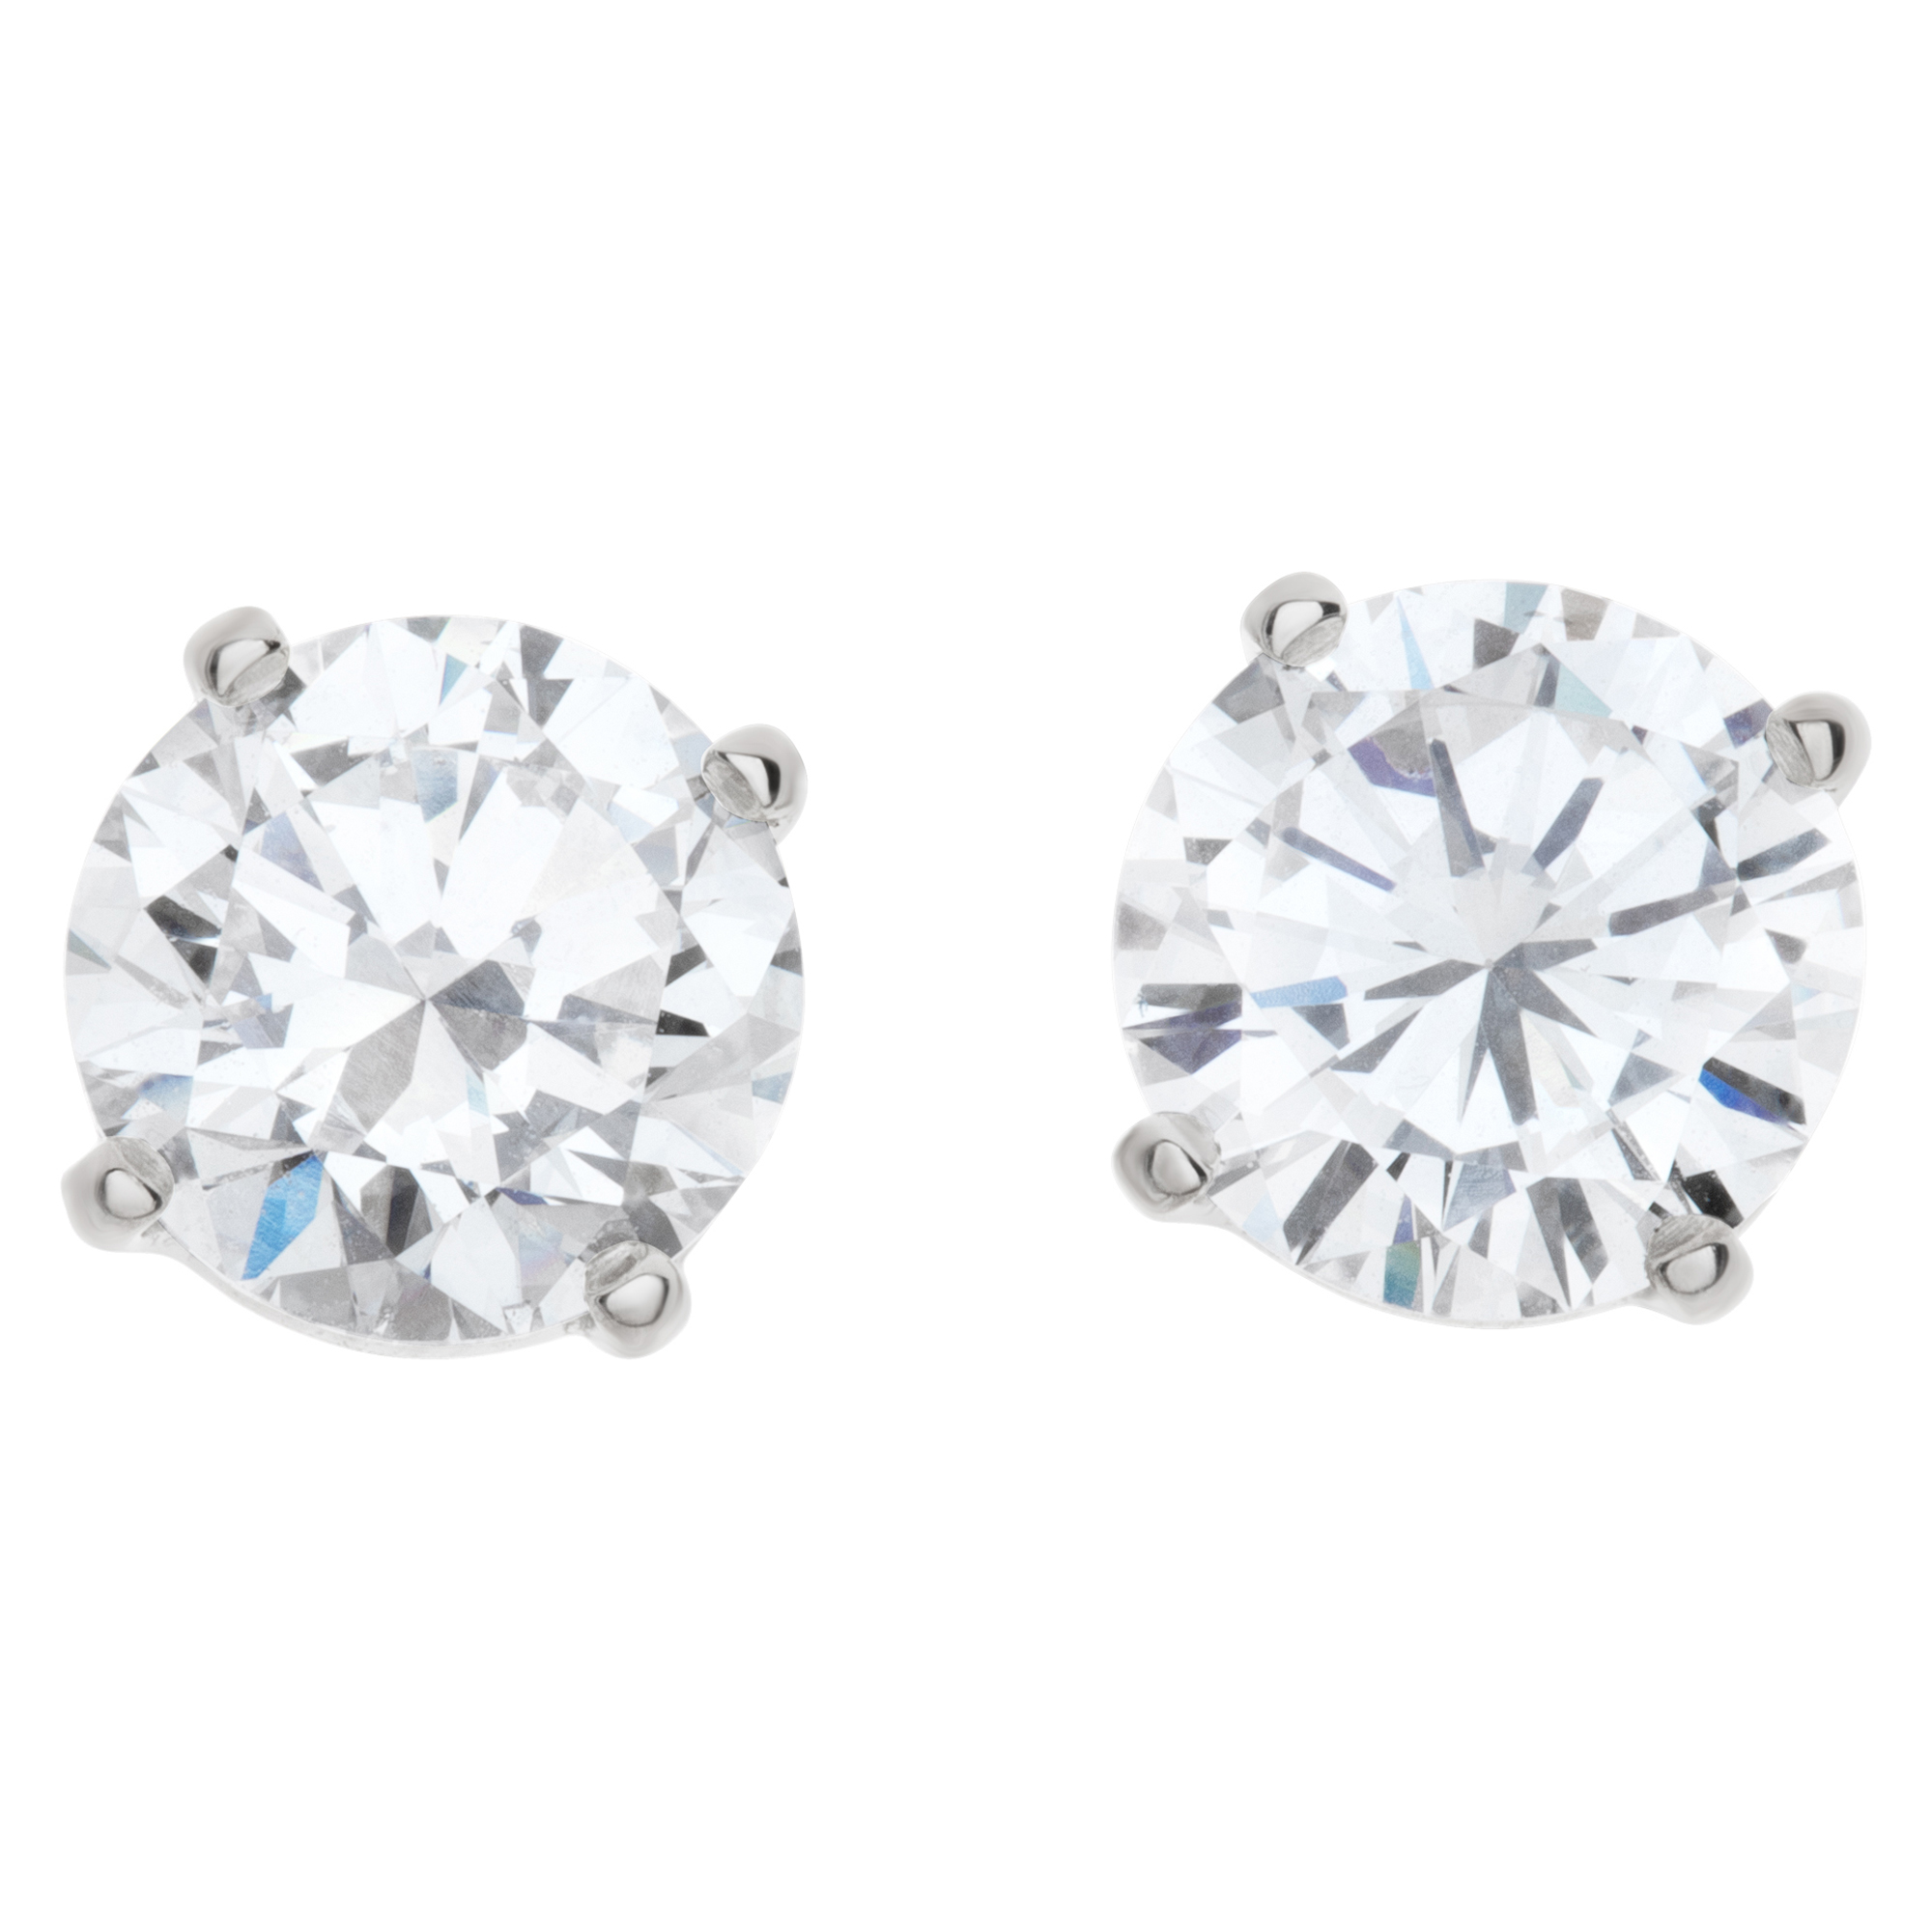 GIA certified pair of round diamond studs set in 18k white gold- Total Weight: 2.07 carats.